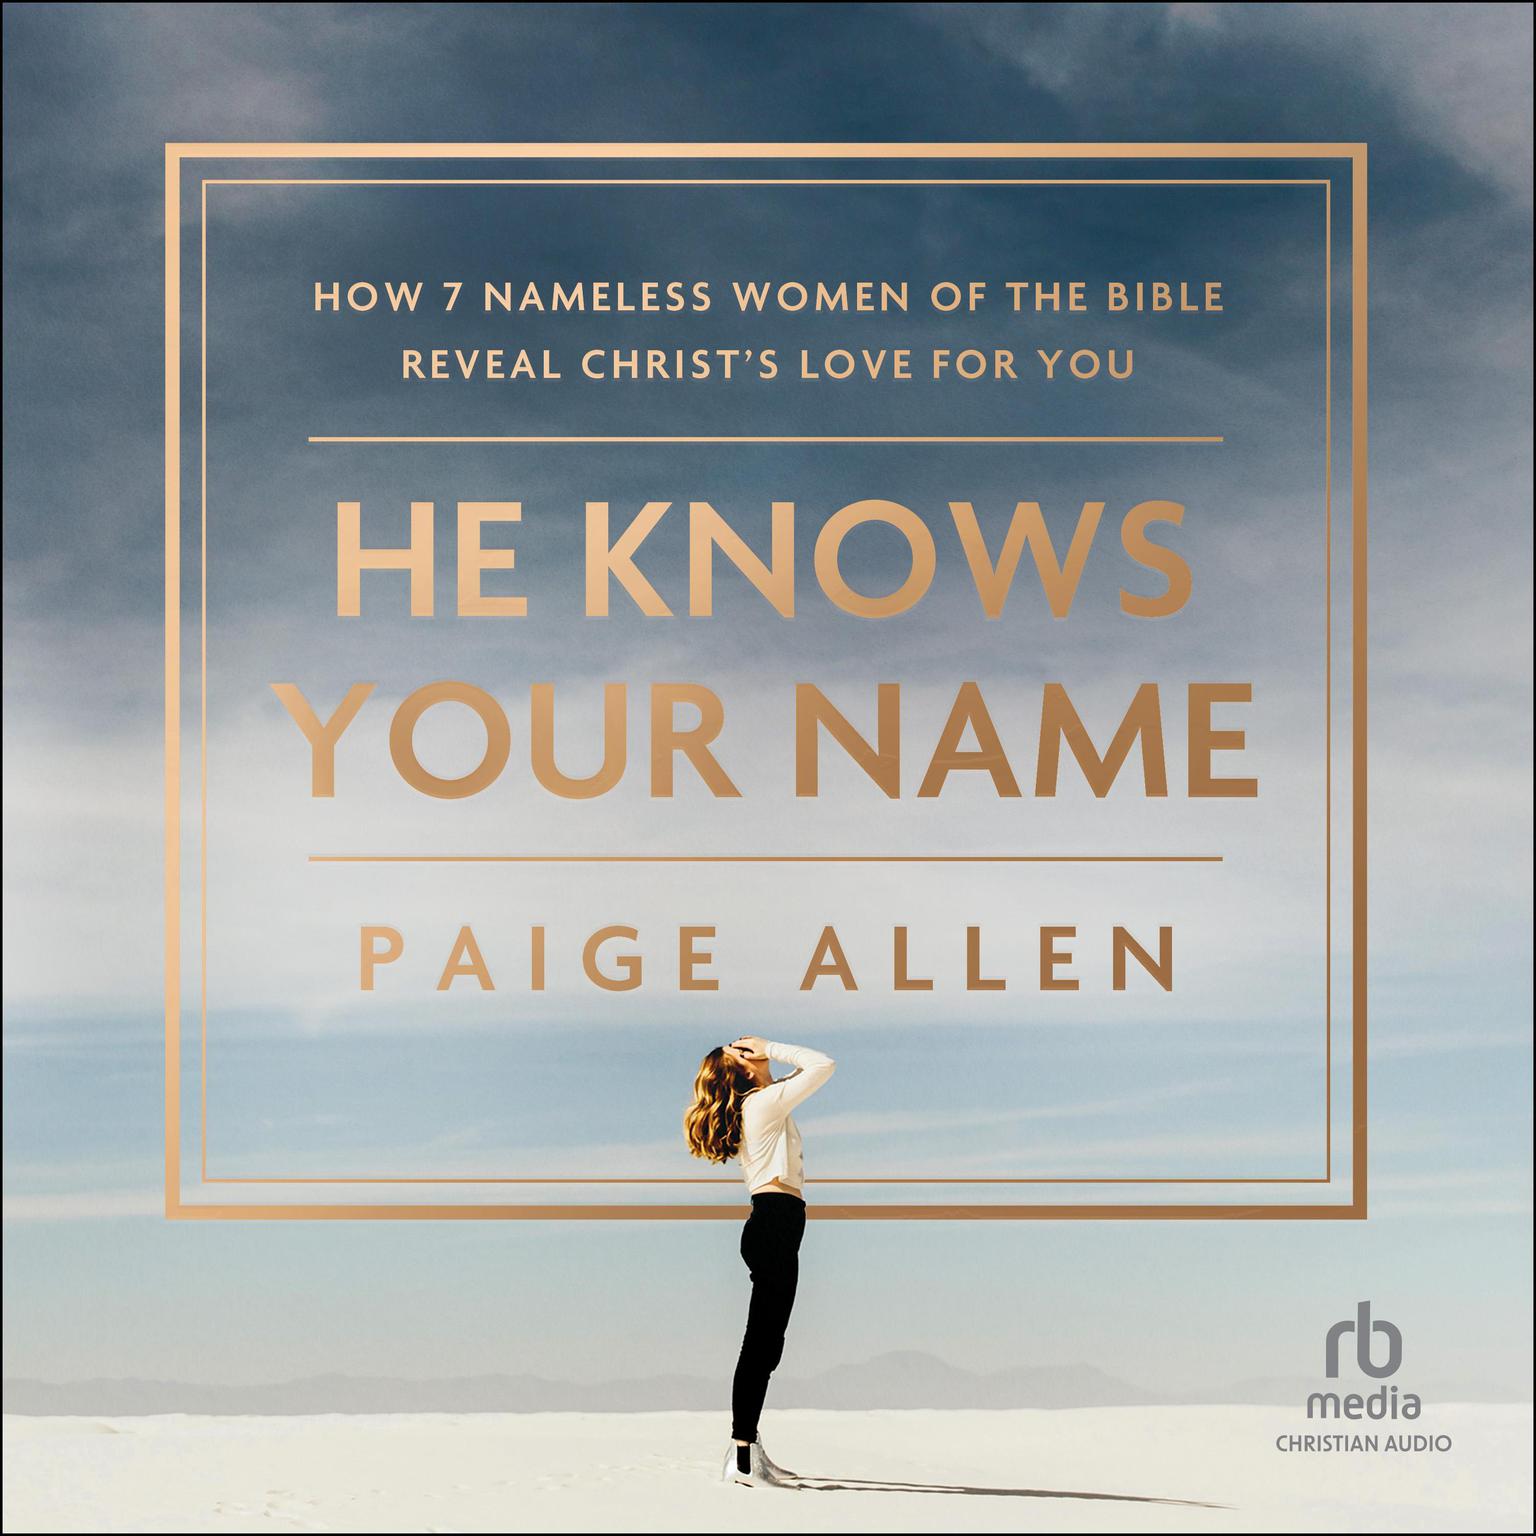 He Knows Your Name: How 7 Nameless Women of the Bible Reveal Christs Love for You Audiobook, by Paige Allen